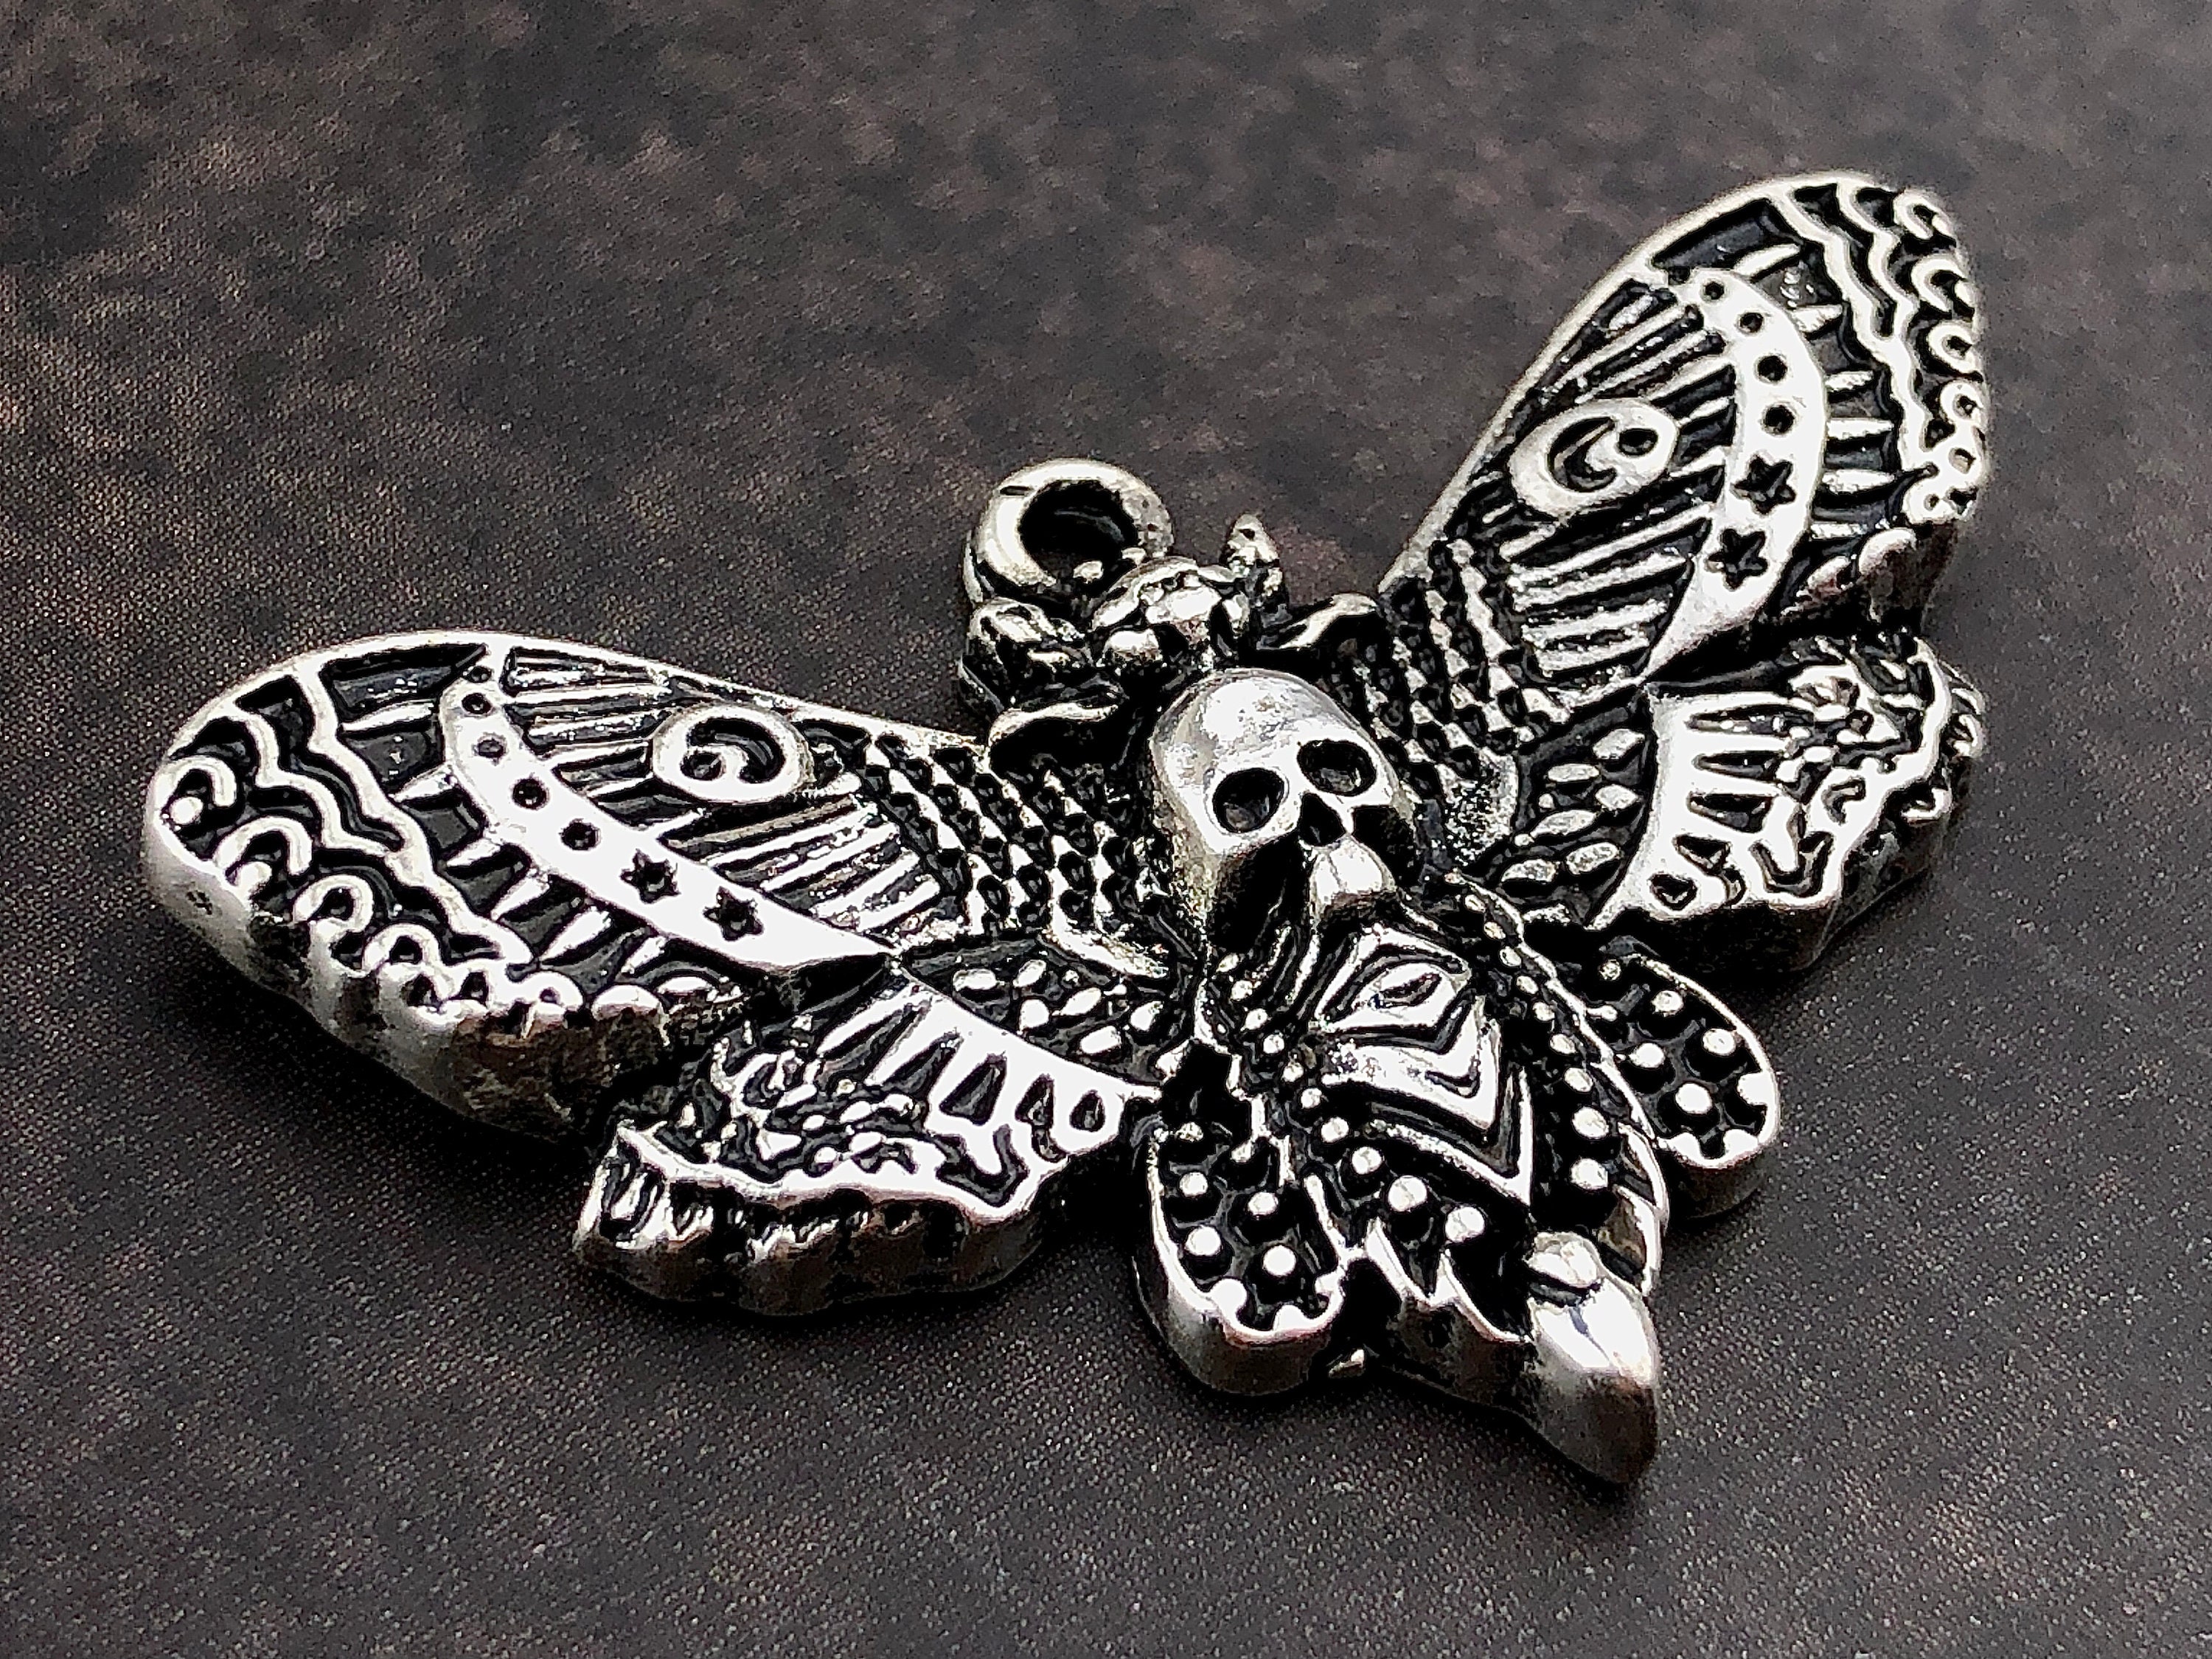 1pcs/4pcs Gold Luna Moth Pendant Metal Charms Insect Charm Witchy Charms  Wicca Pagan Pendant 